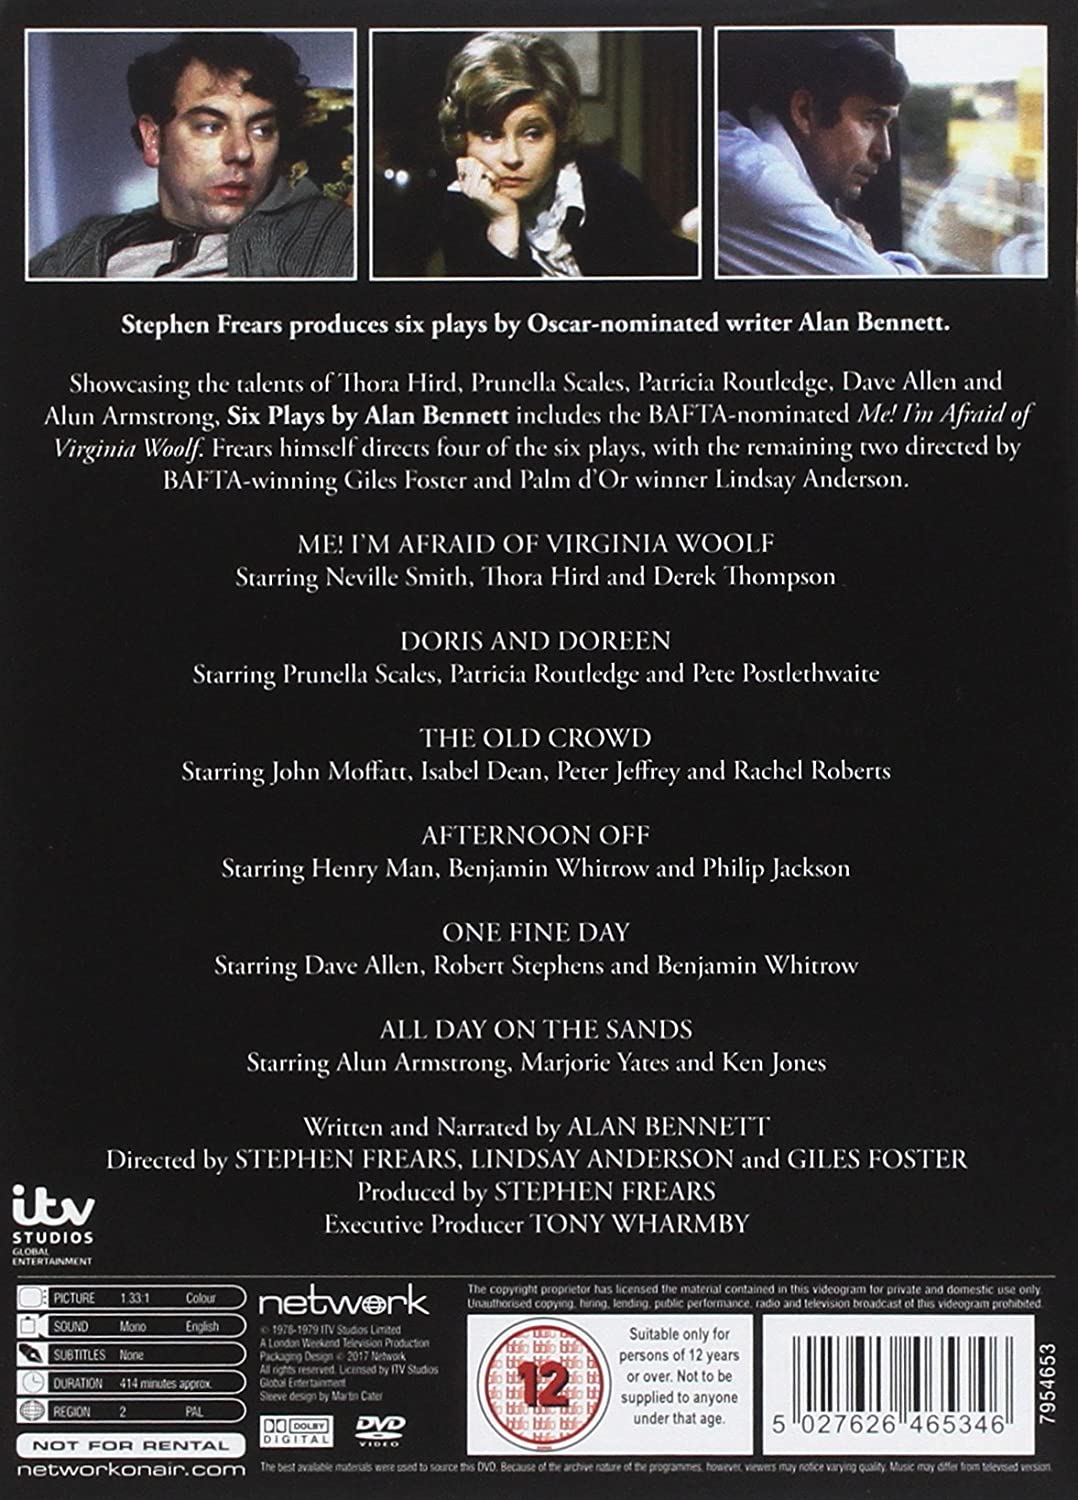 Six Plays By Alan Bennett: The Complete Series - Drama [DVD]